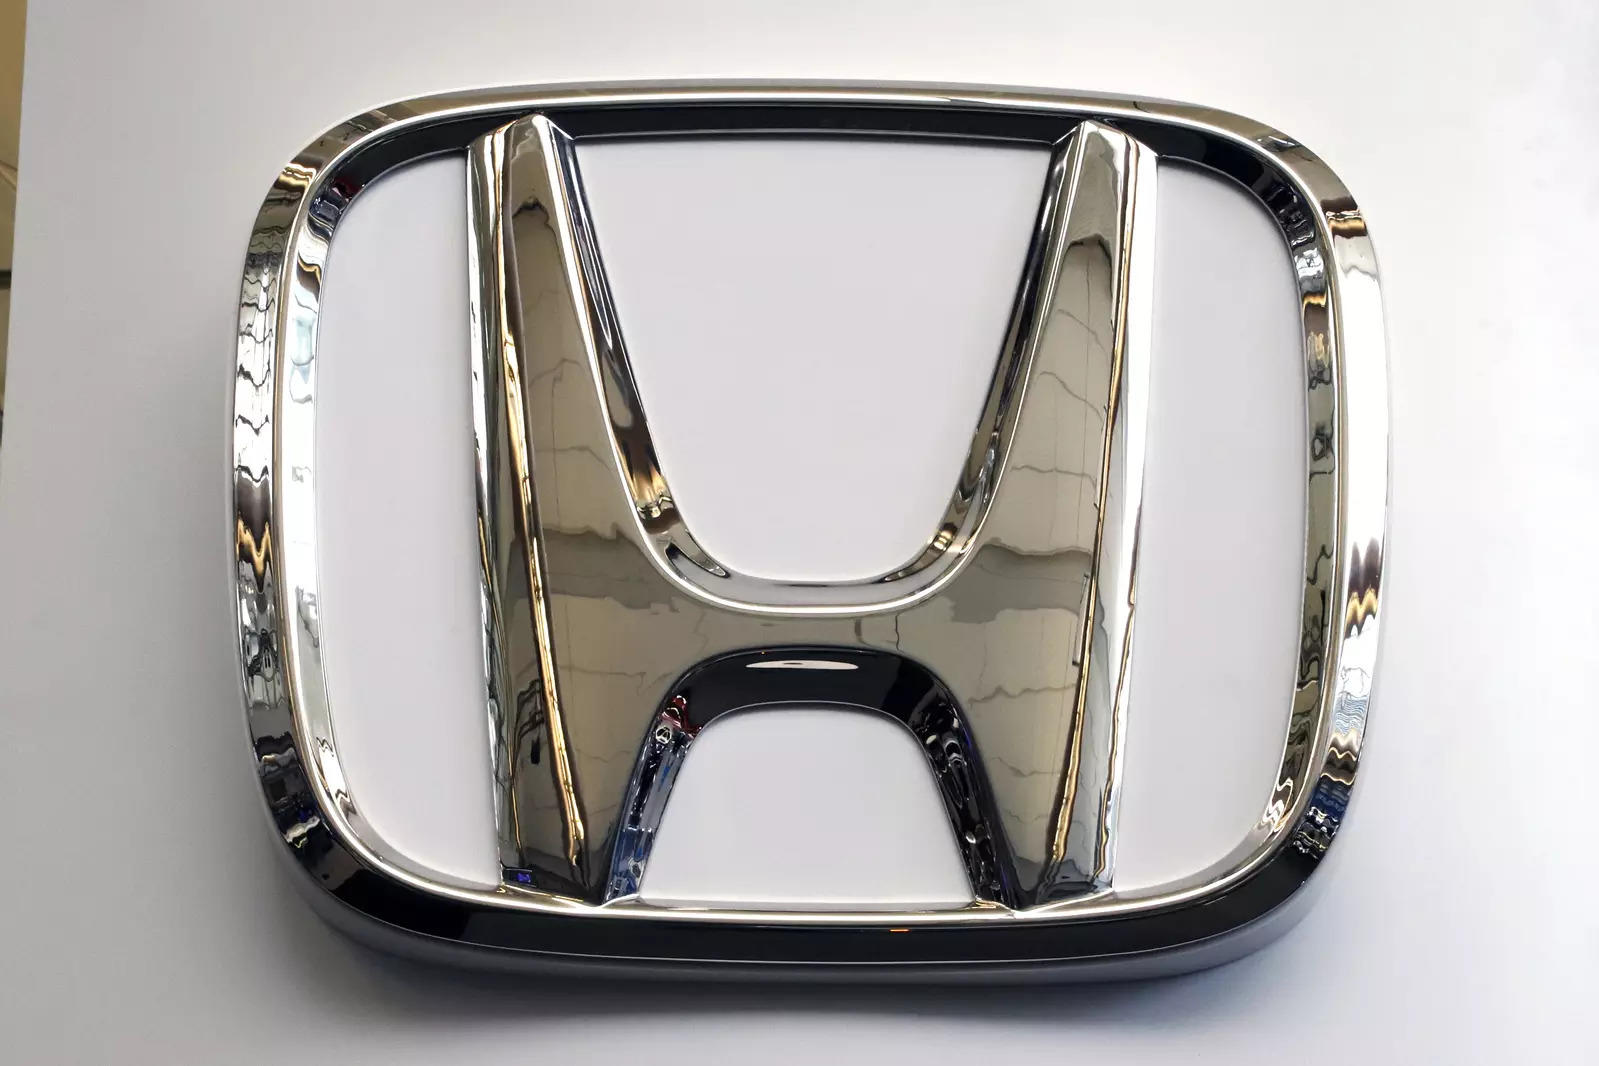 Honda to launch new car every year till 2028 in India, Auto News